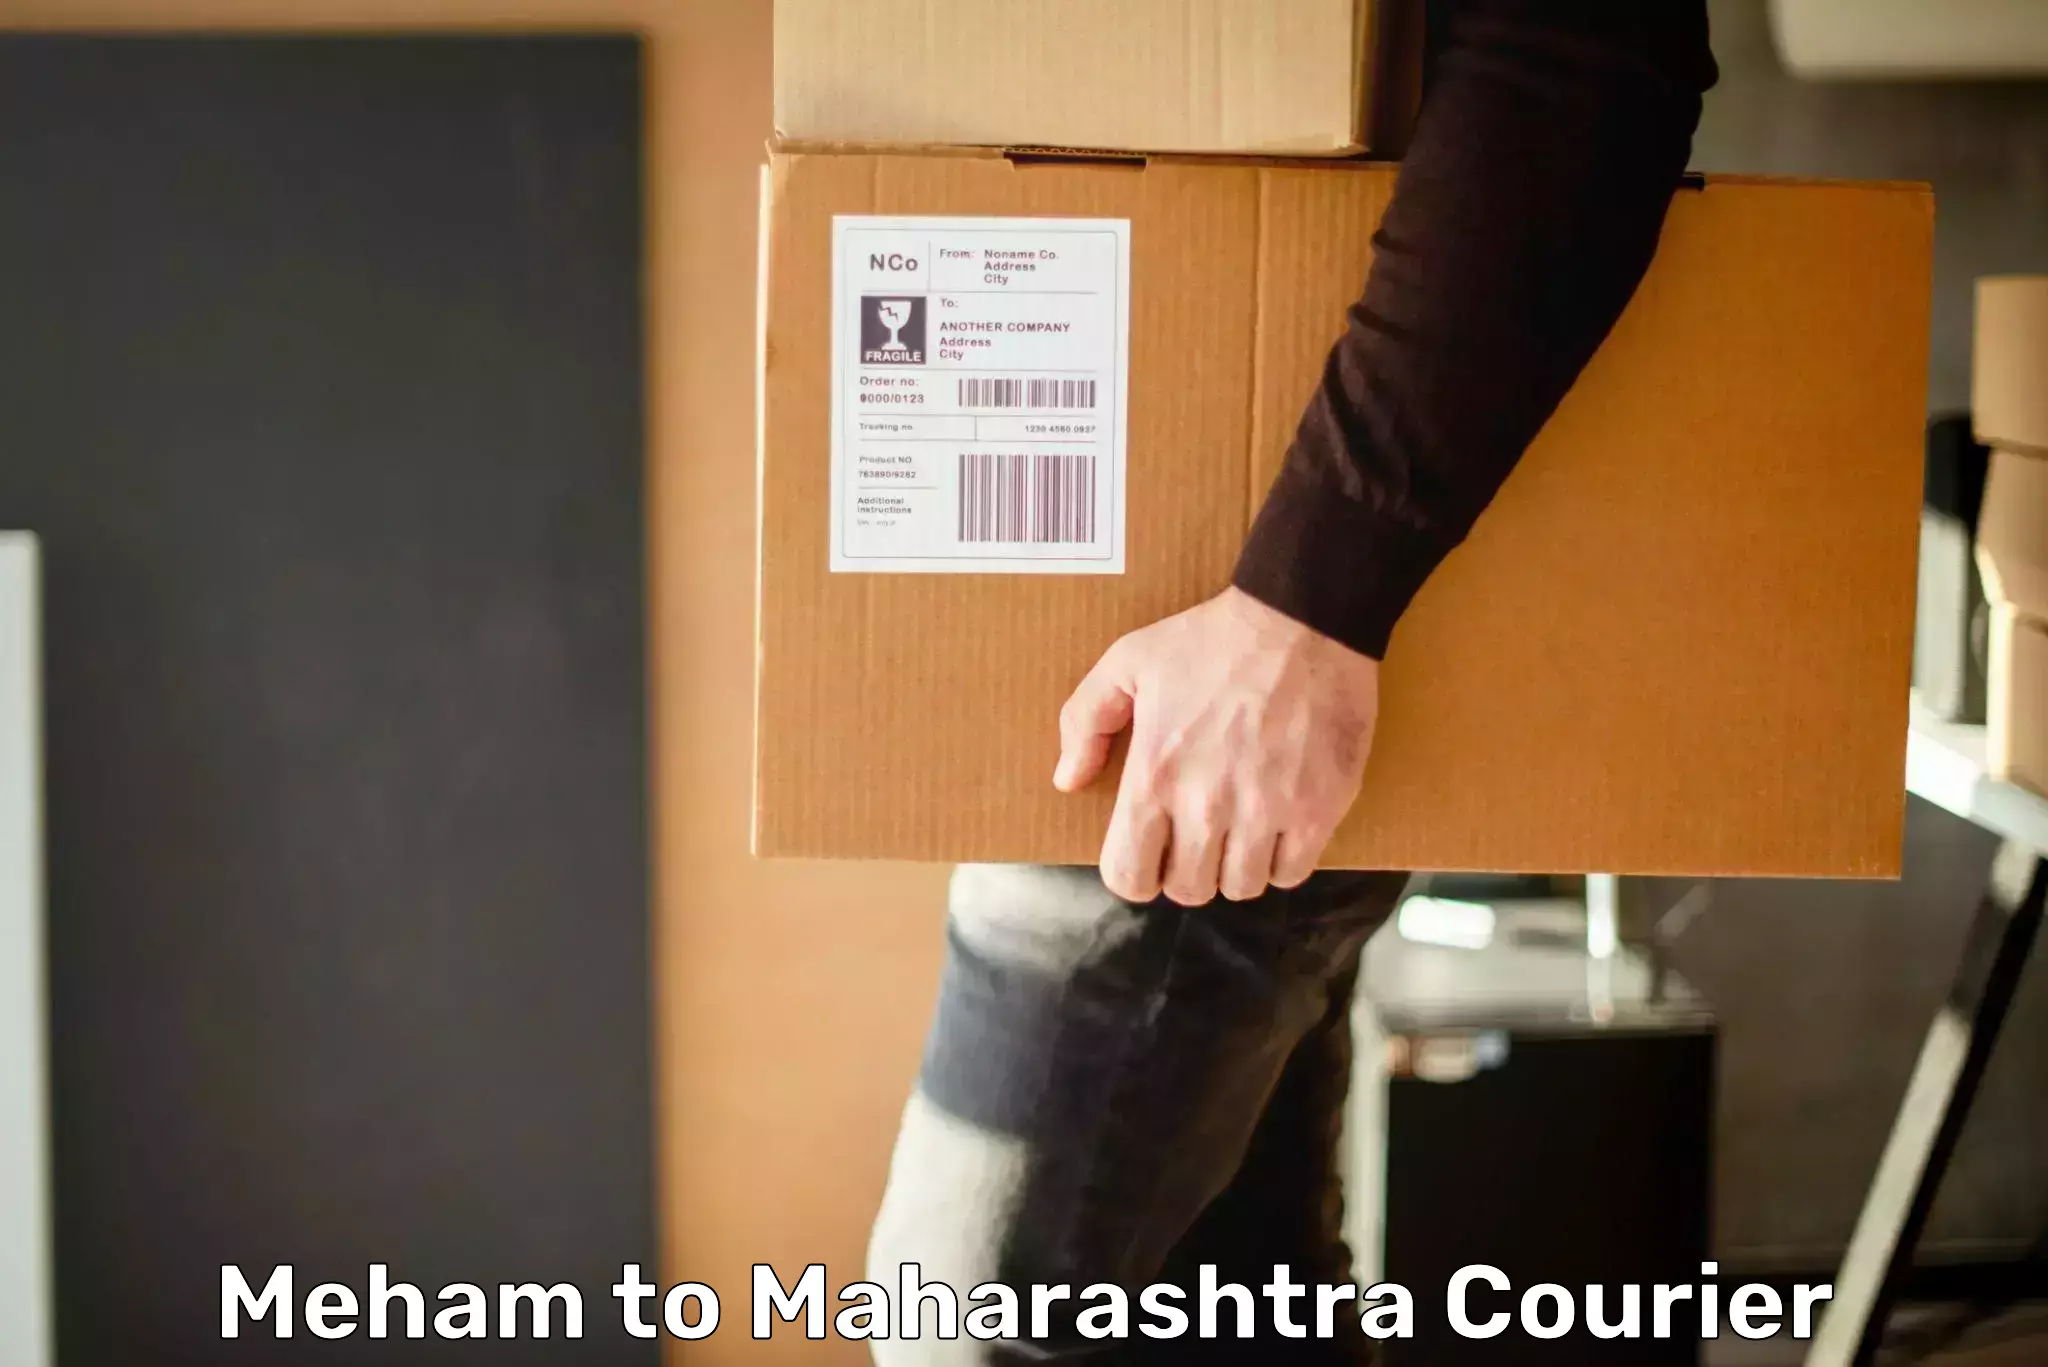 User-friendly delivery service Meham to Maharashtra